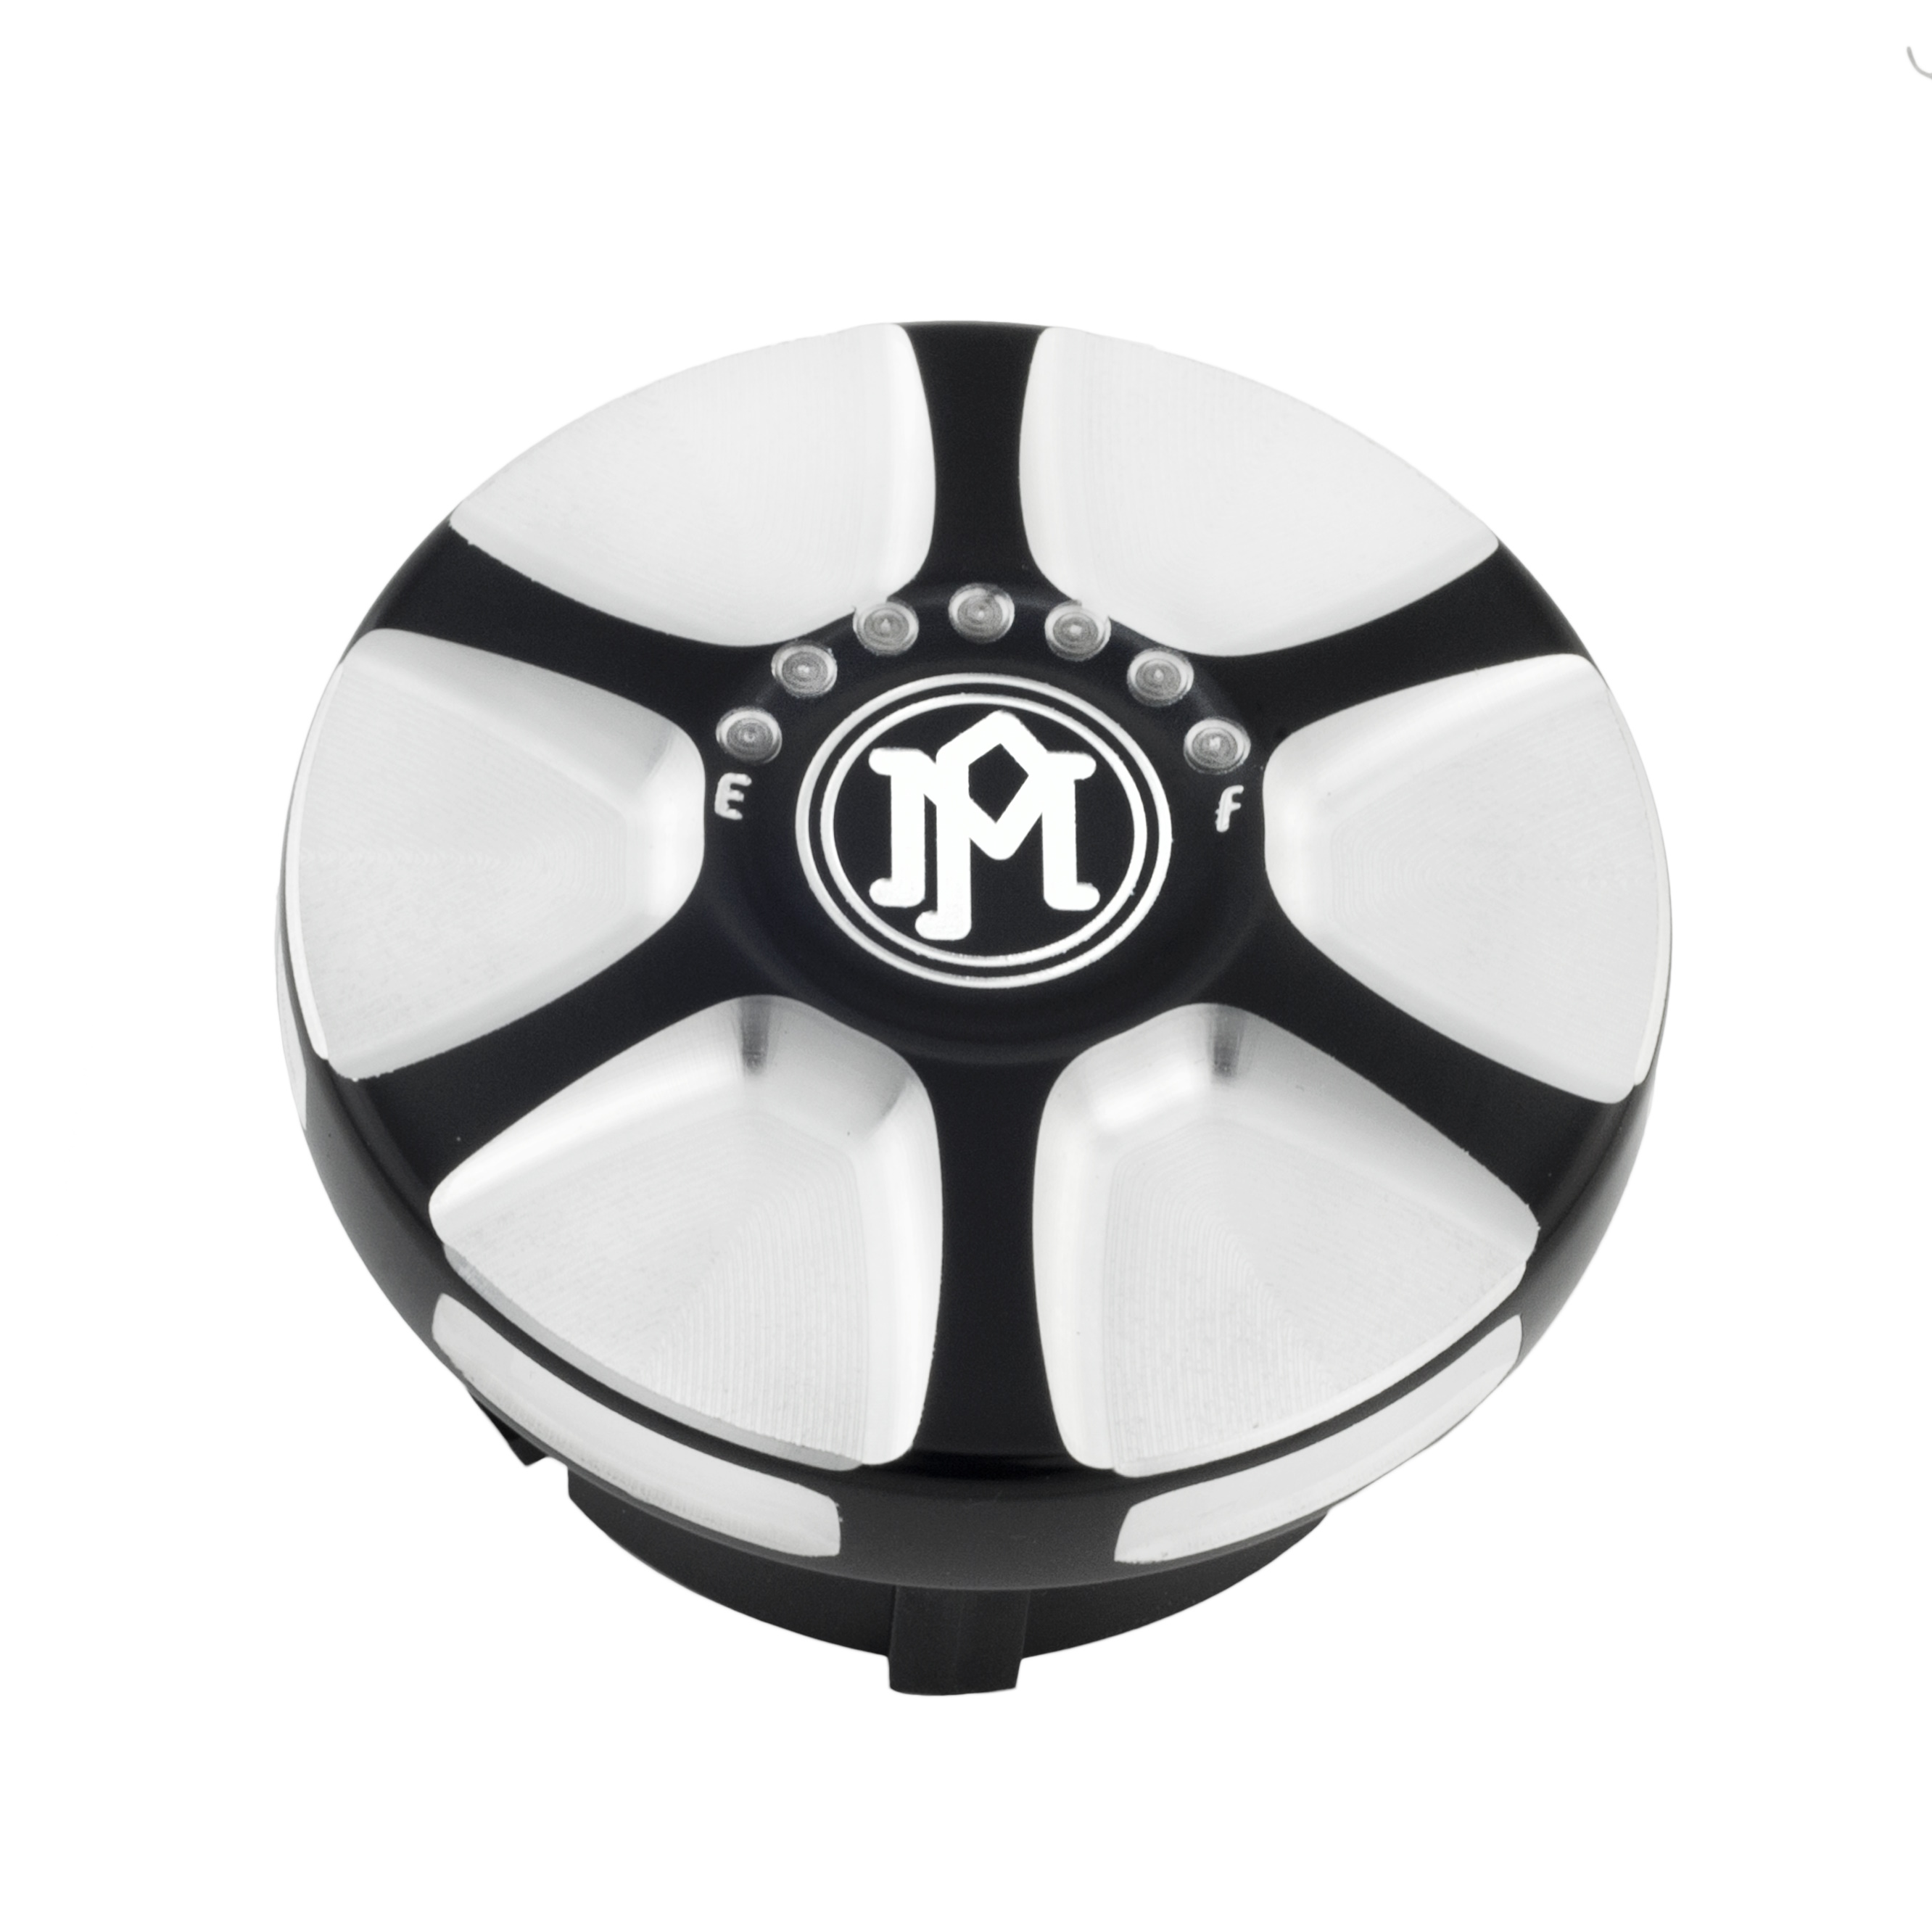 Performance Machine Apex Gas Cap for 1996-2017 Harley Models Contrast Cut